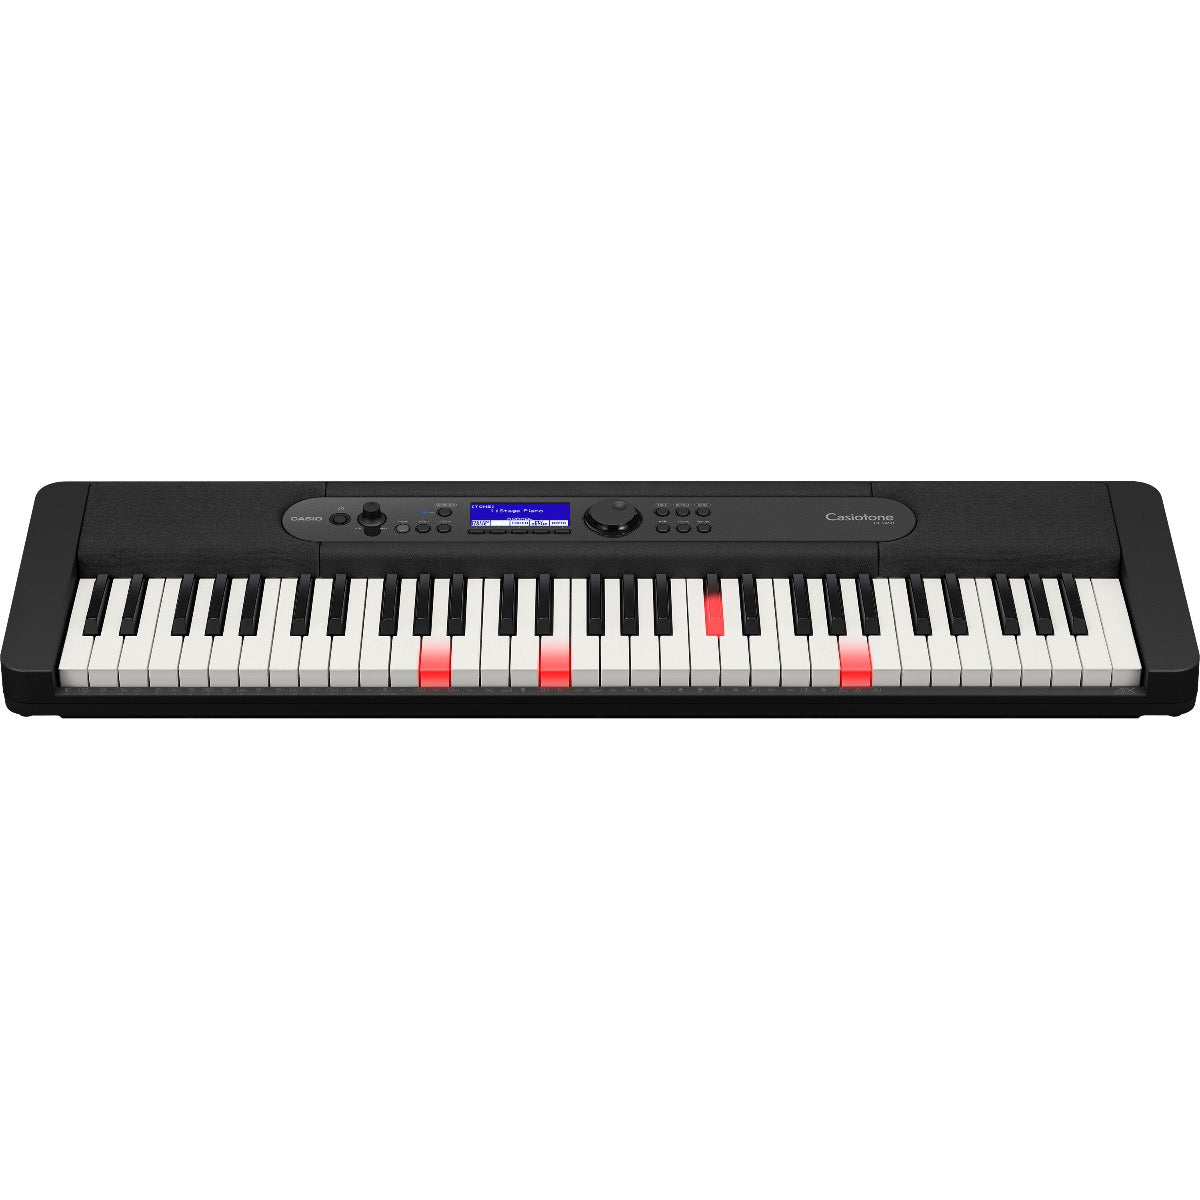 Perspective view of Casio Casiotone LK-S450 Portable Keyboard - Black showing top and front